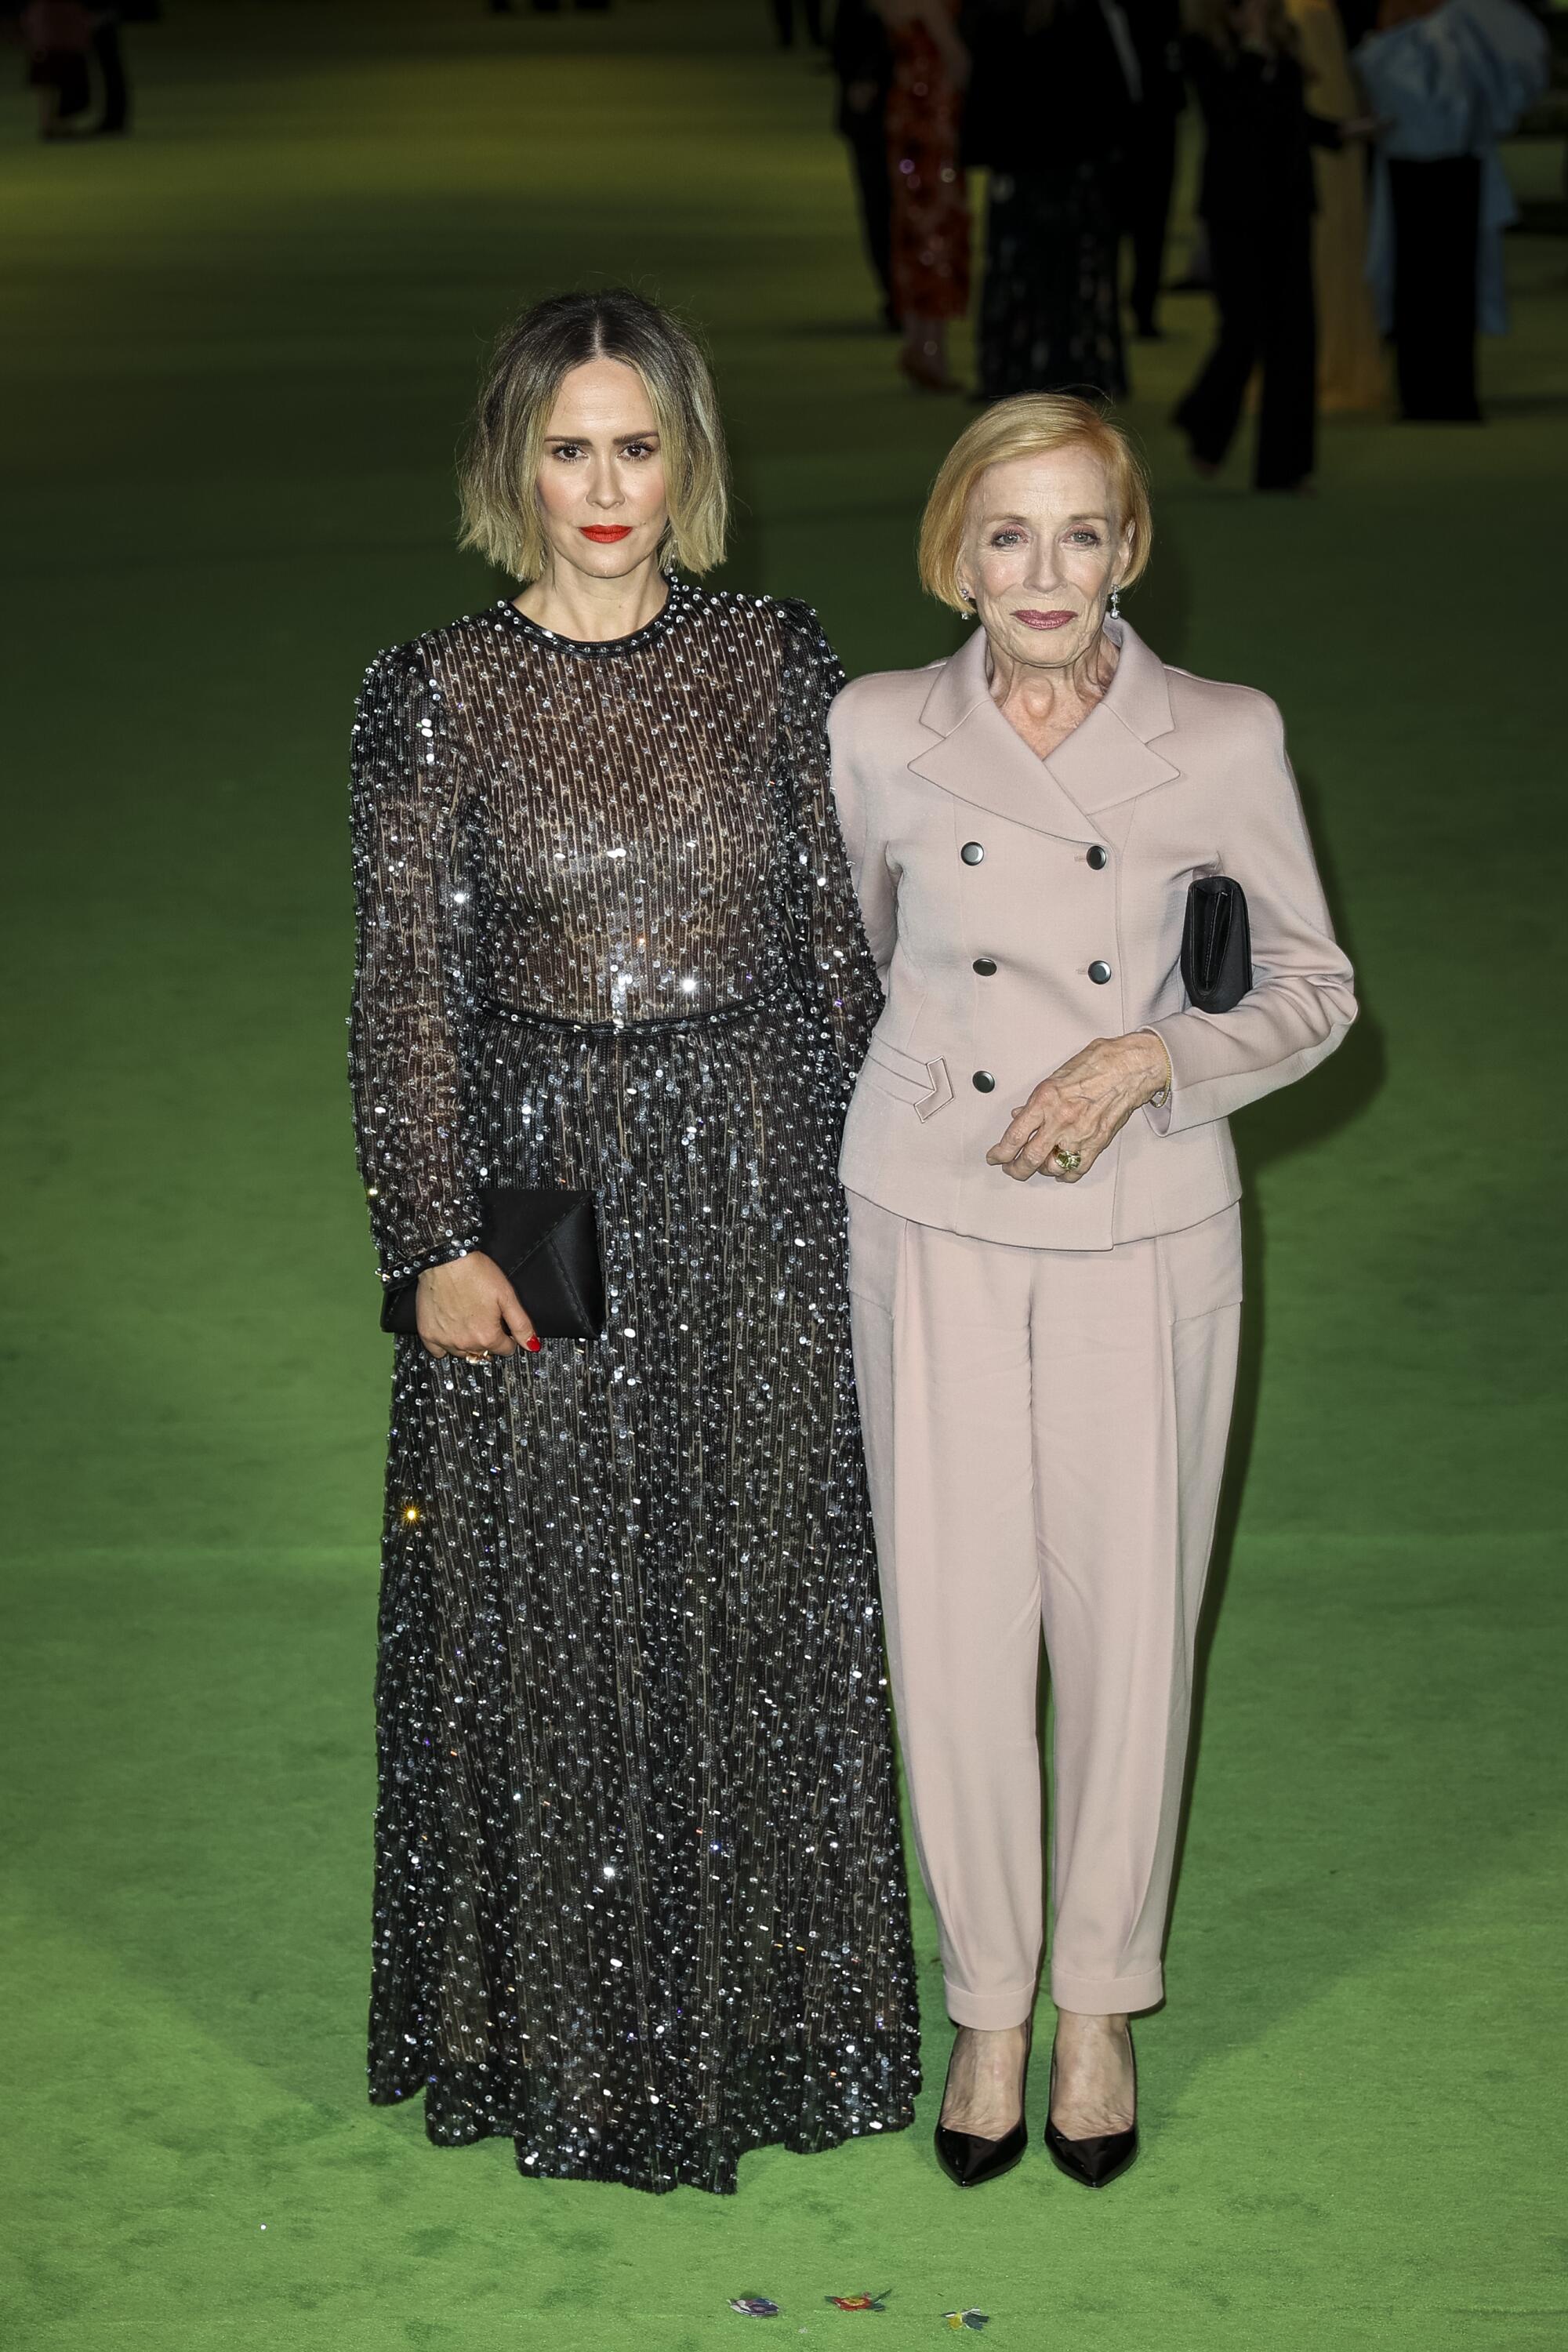 A woman in a black sequined dress next to a woman in a beige pantsuit on the green carpet